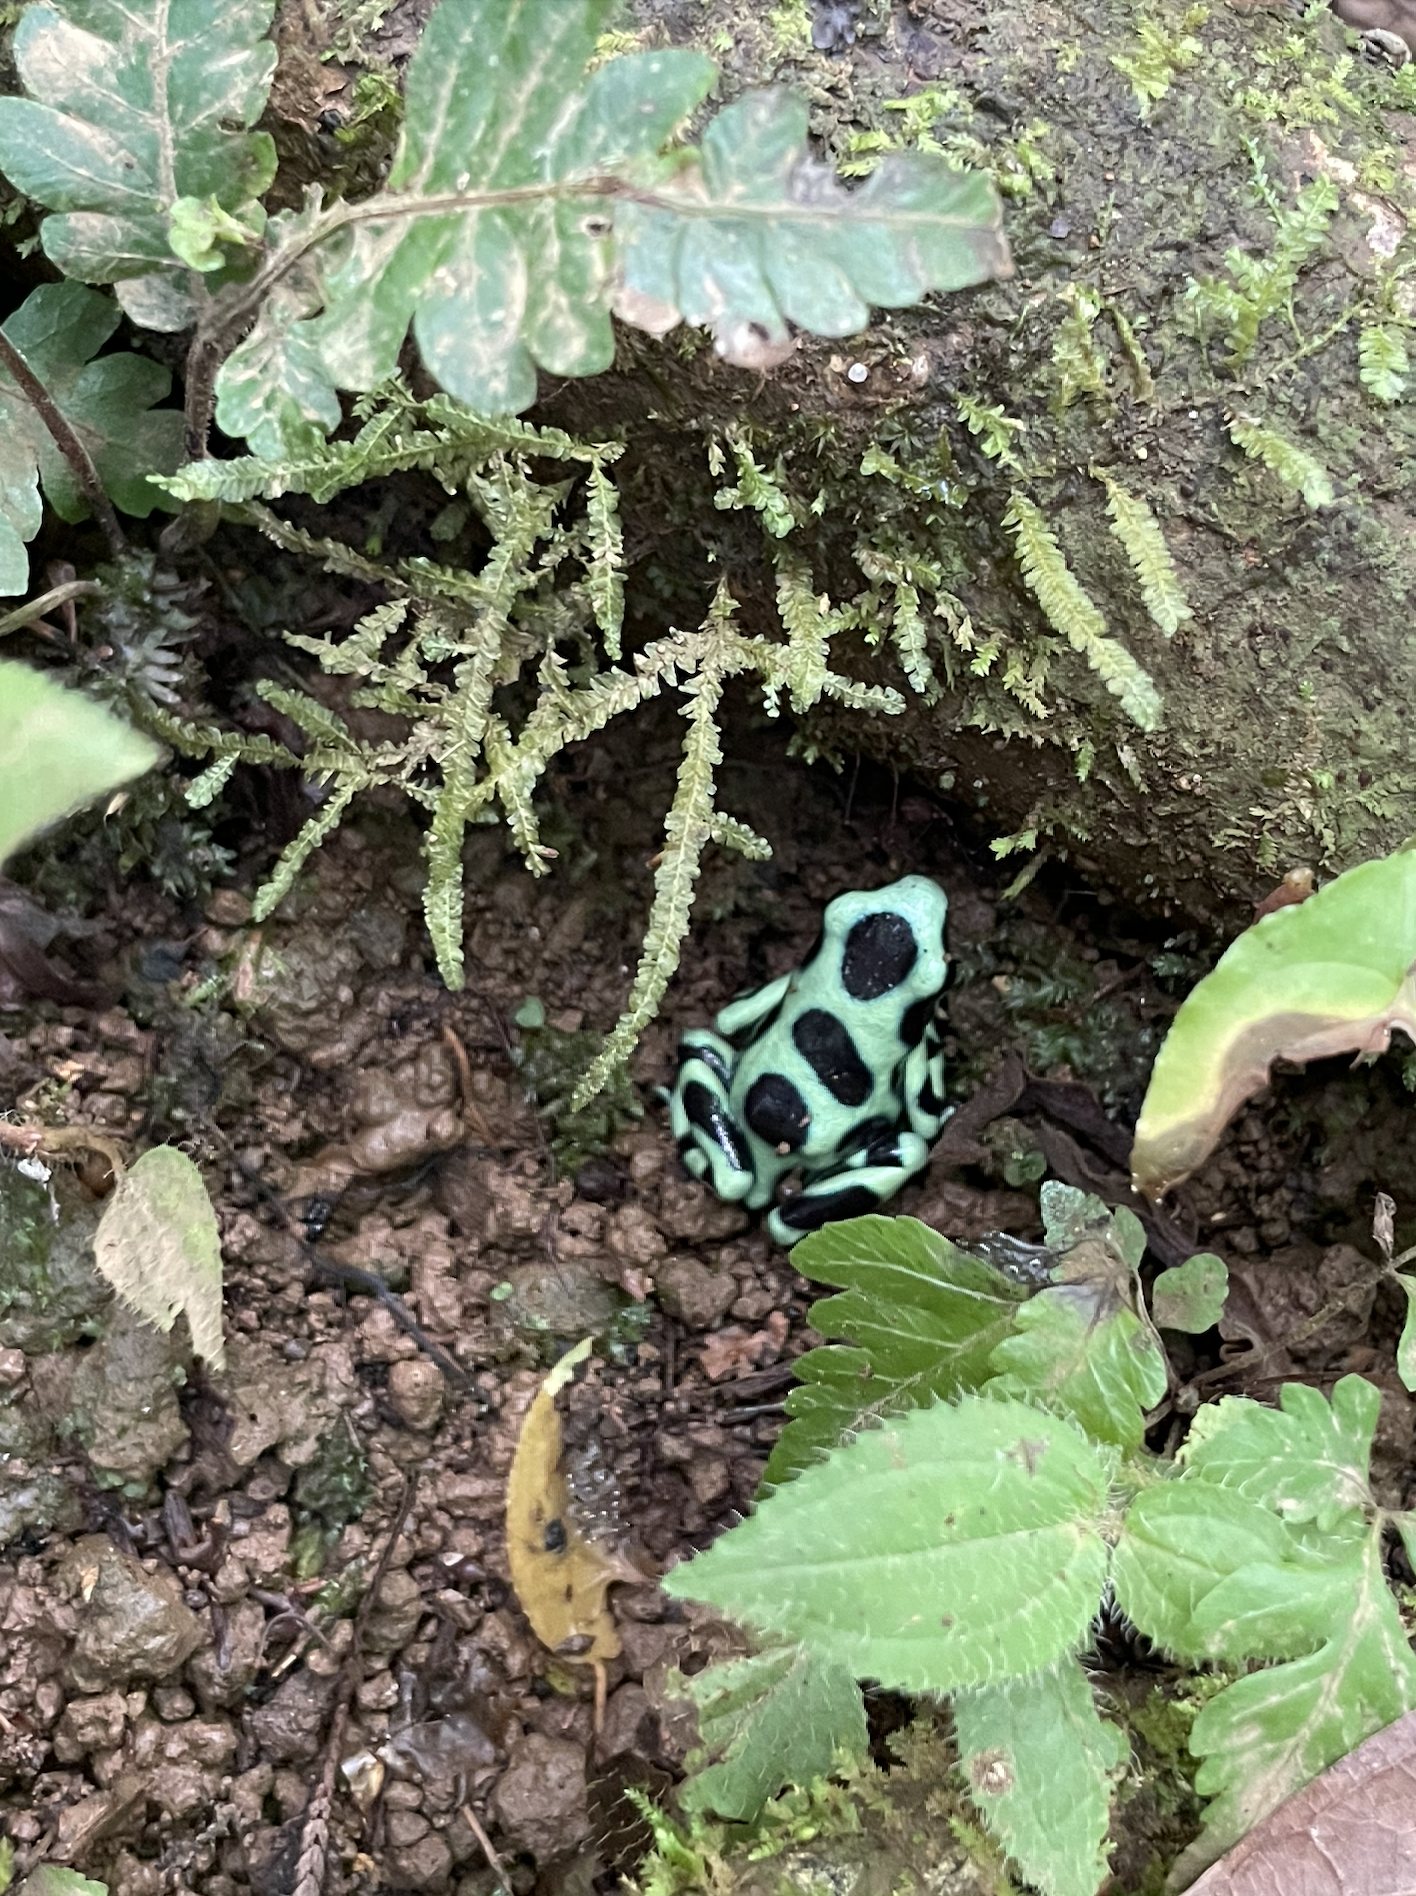 One of many Poison Dart Frog species in the Bocas del Toro Archipelago